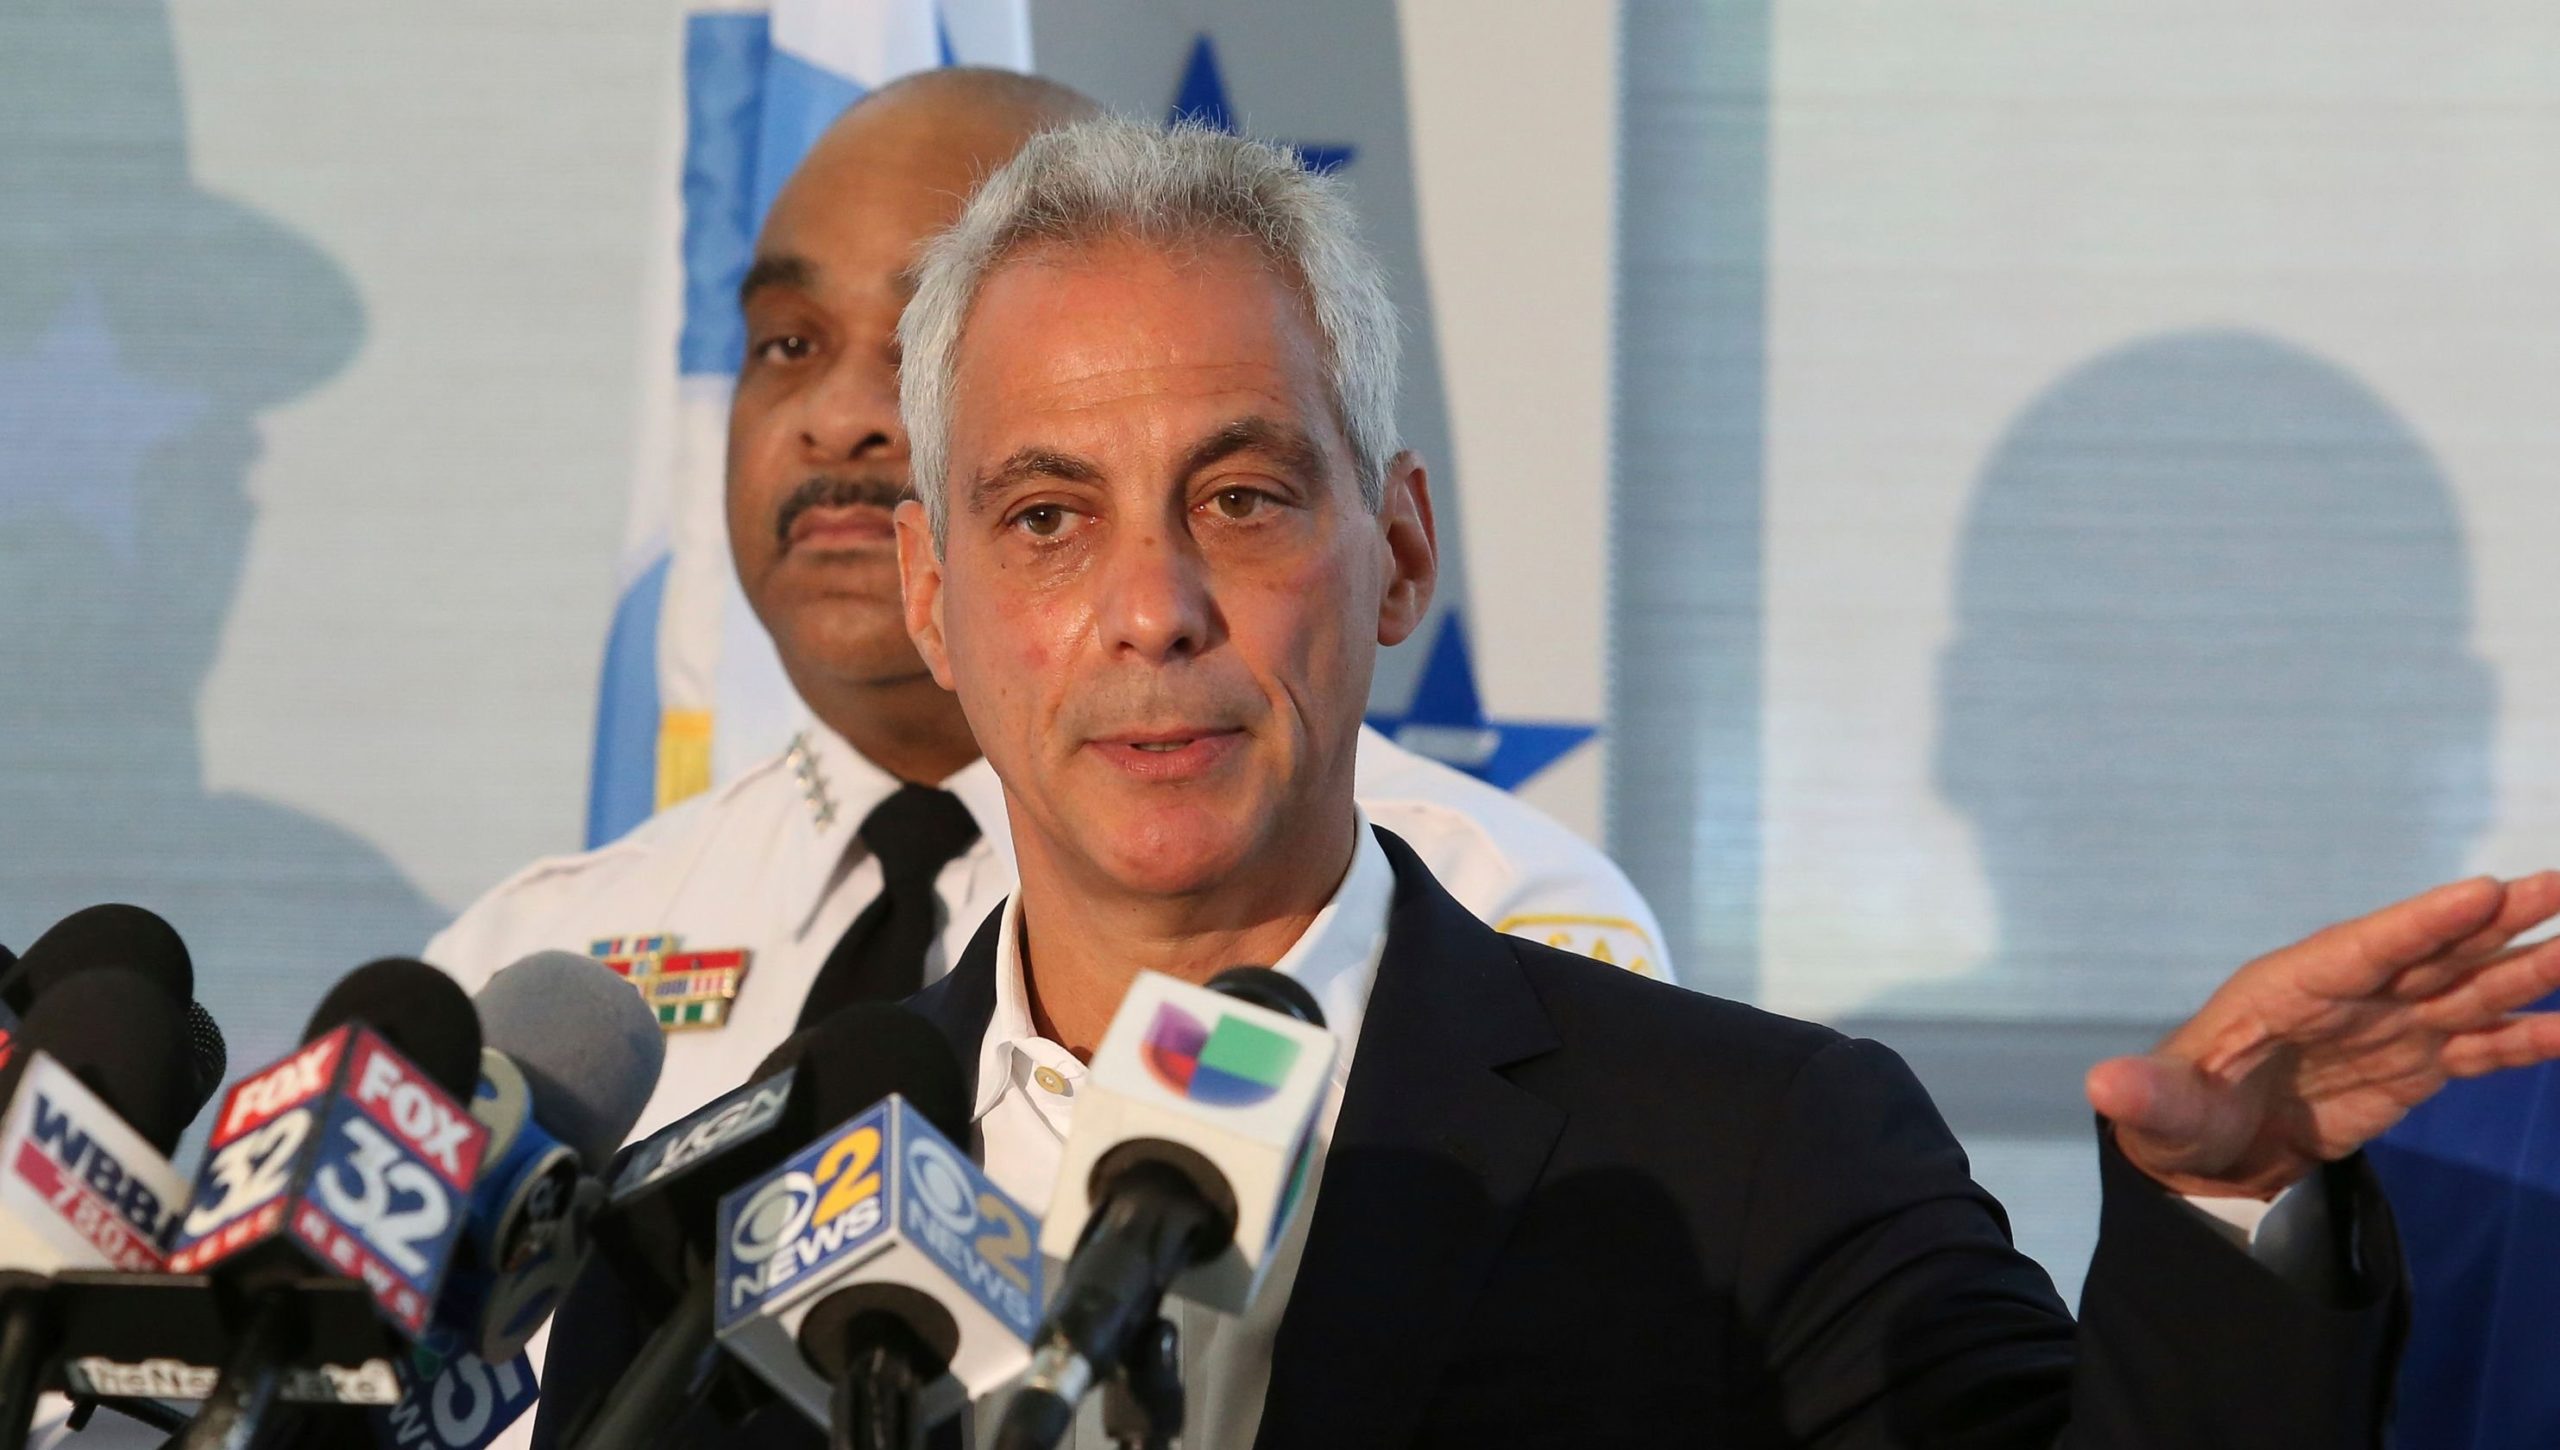 Chicago mayor: Legalize marijuana, open casino to help with pension crisis